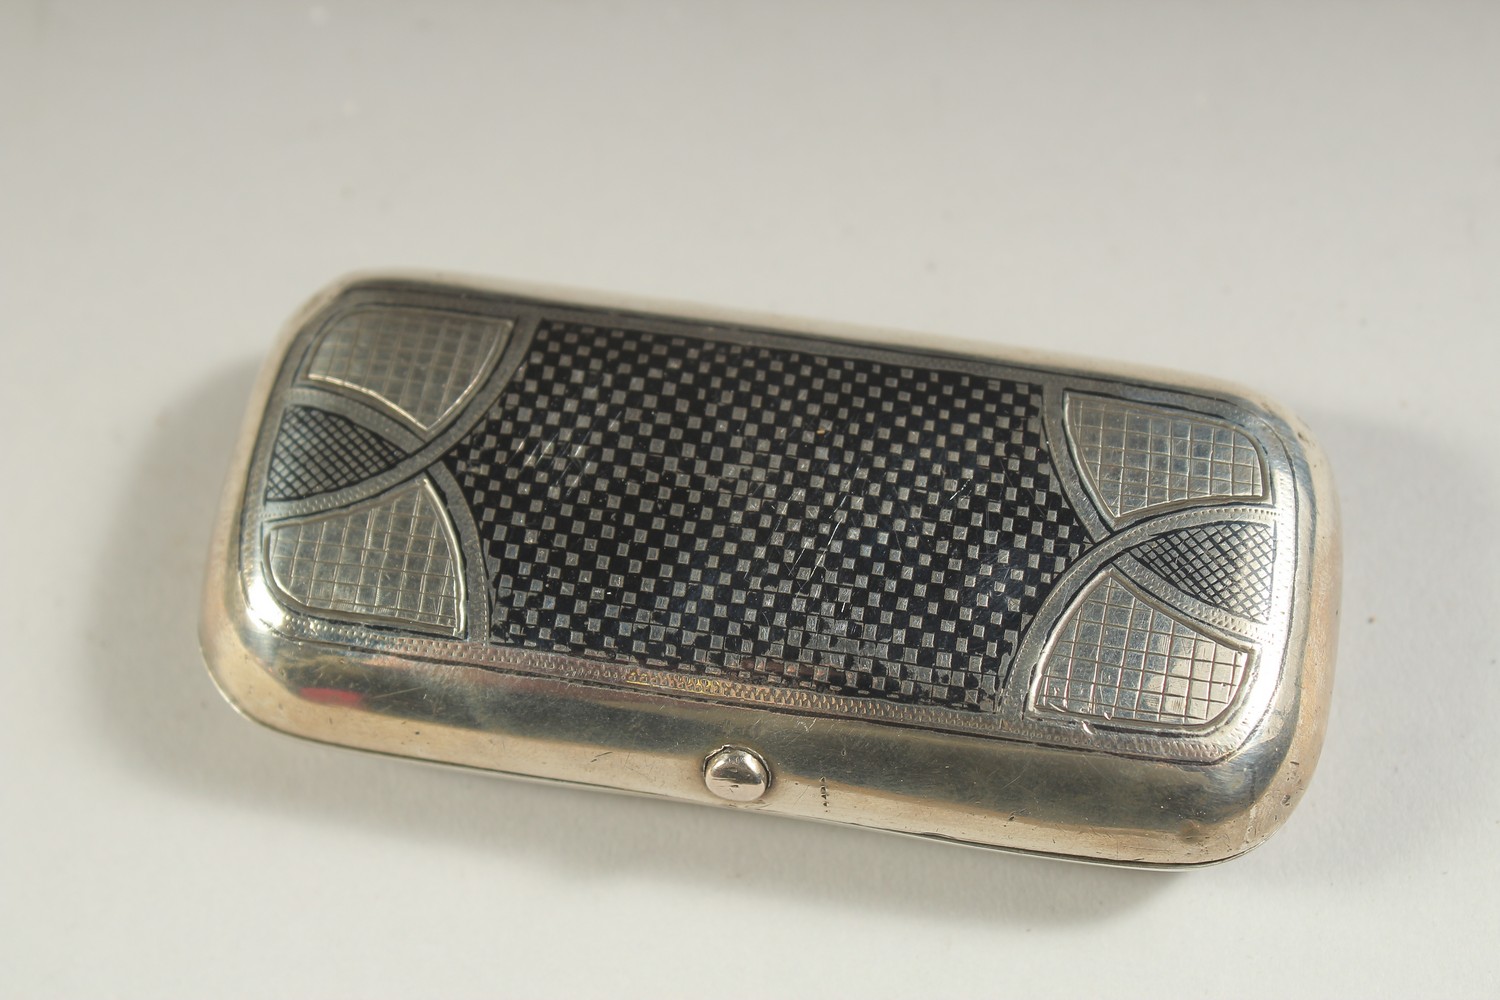 AN ANTIQUE RUSSIAN OTTOMAN SOLID SILVER AND NIELLO SNUFF BOX, 1889, with Arabic name inscribed, - Image 2 of 5